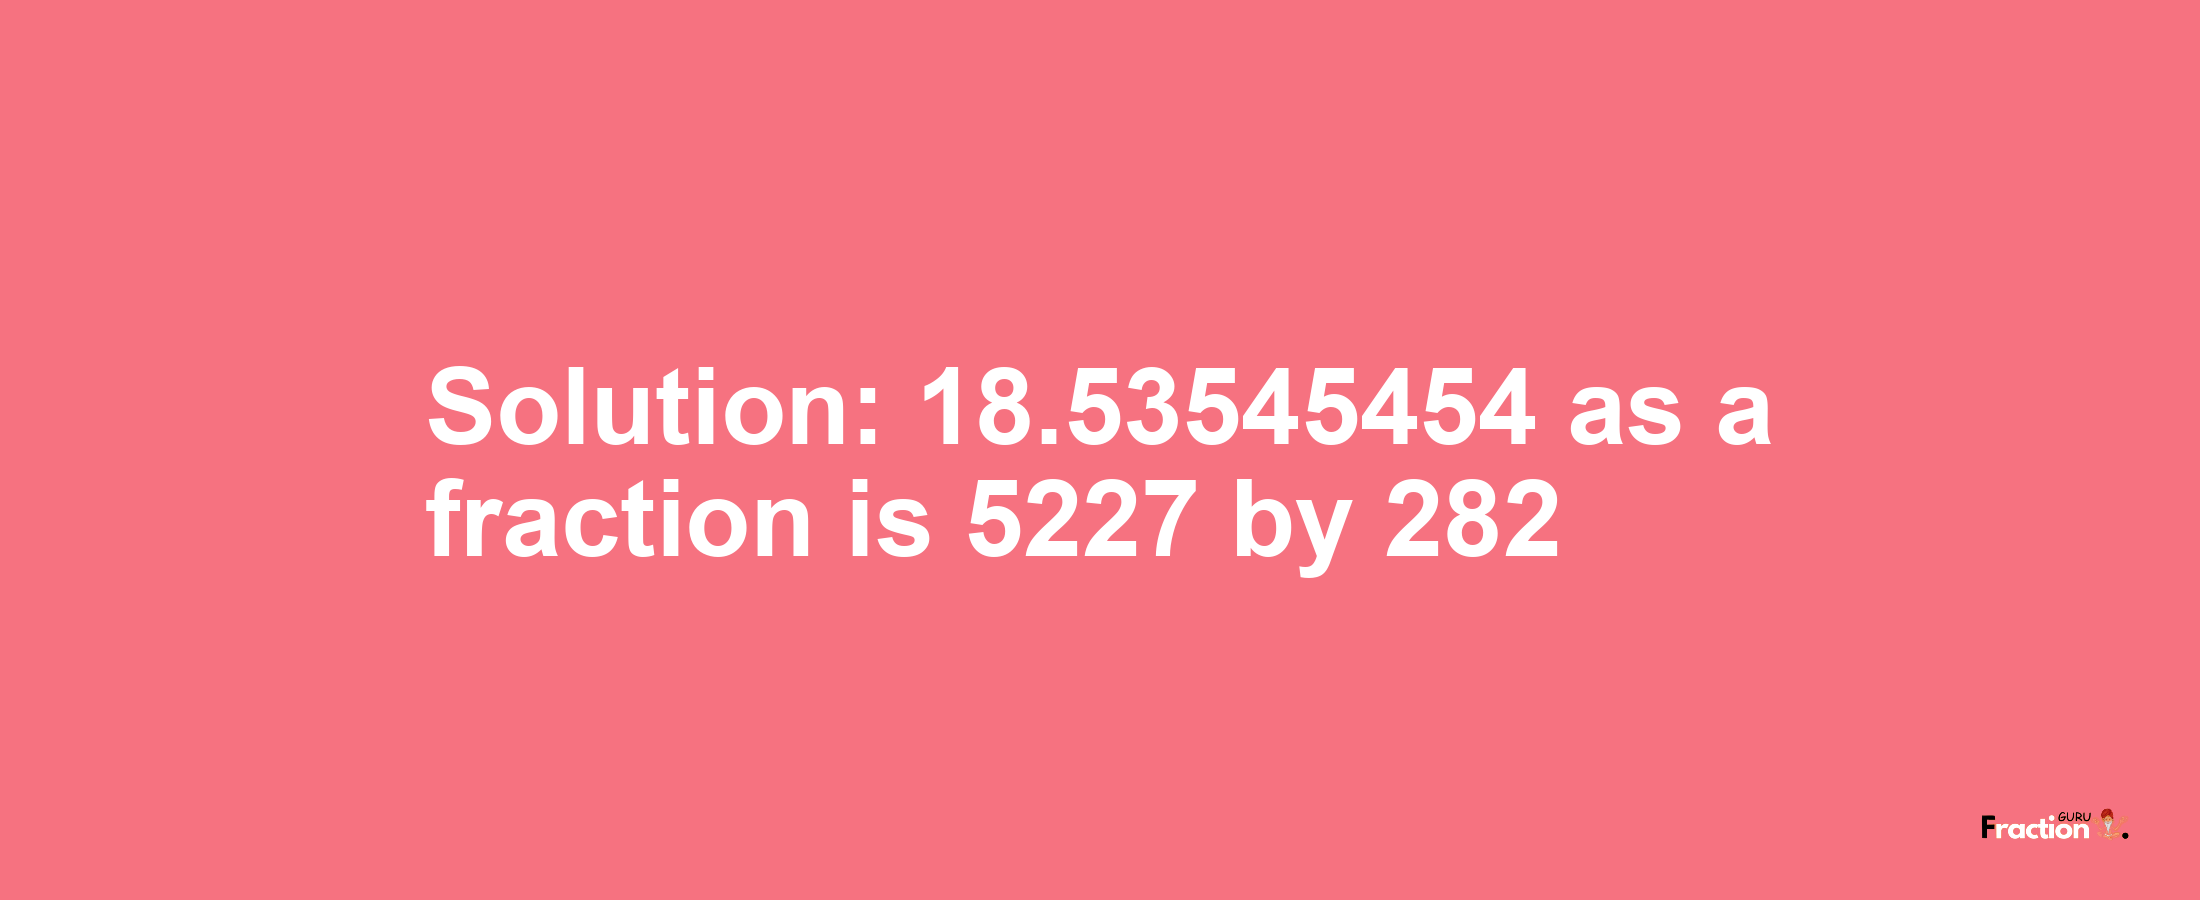 Solution:18.53545454 as a fraction is 5227/282